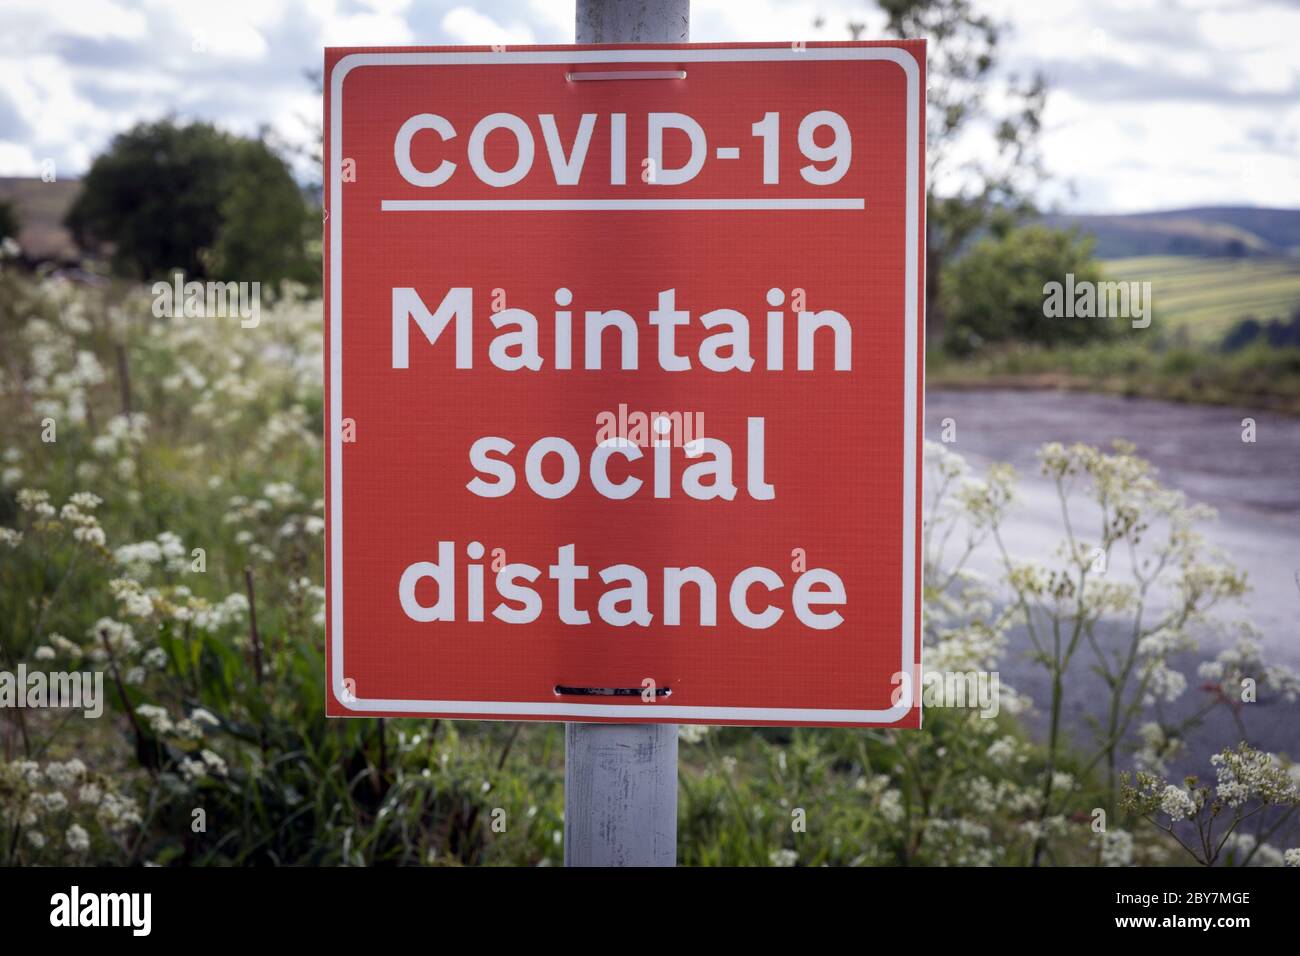 A sign in the countryside near Haworth, West Yorkshire, advising the public to maintain social distancing during the coronavirus pandemic Stock Photo